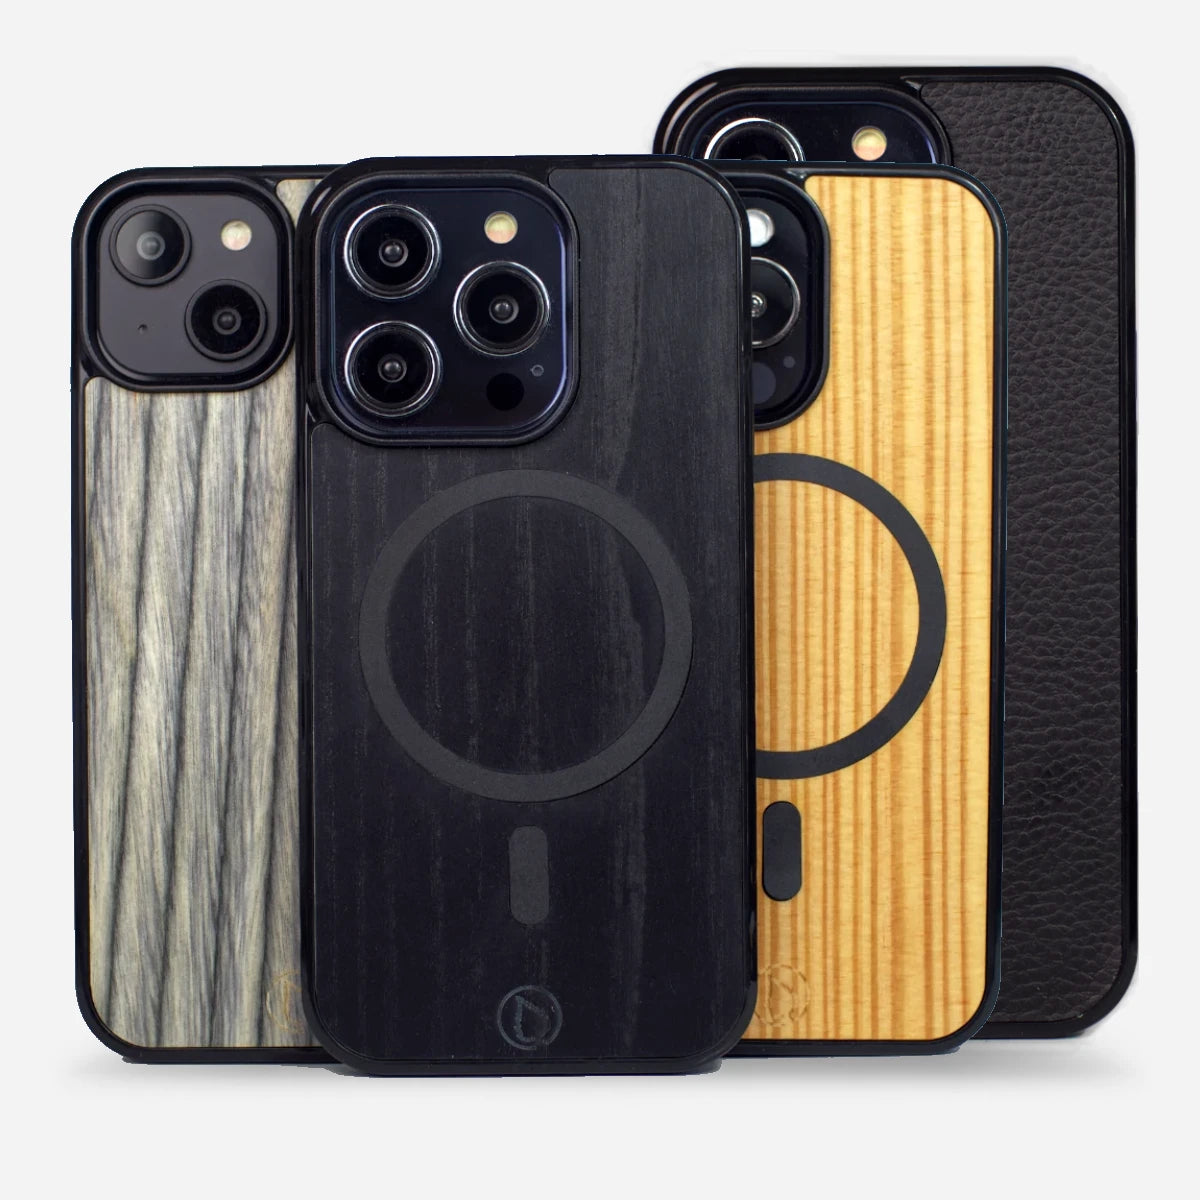 four iphone cases with different designs on them